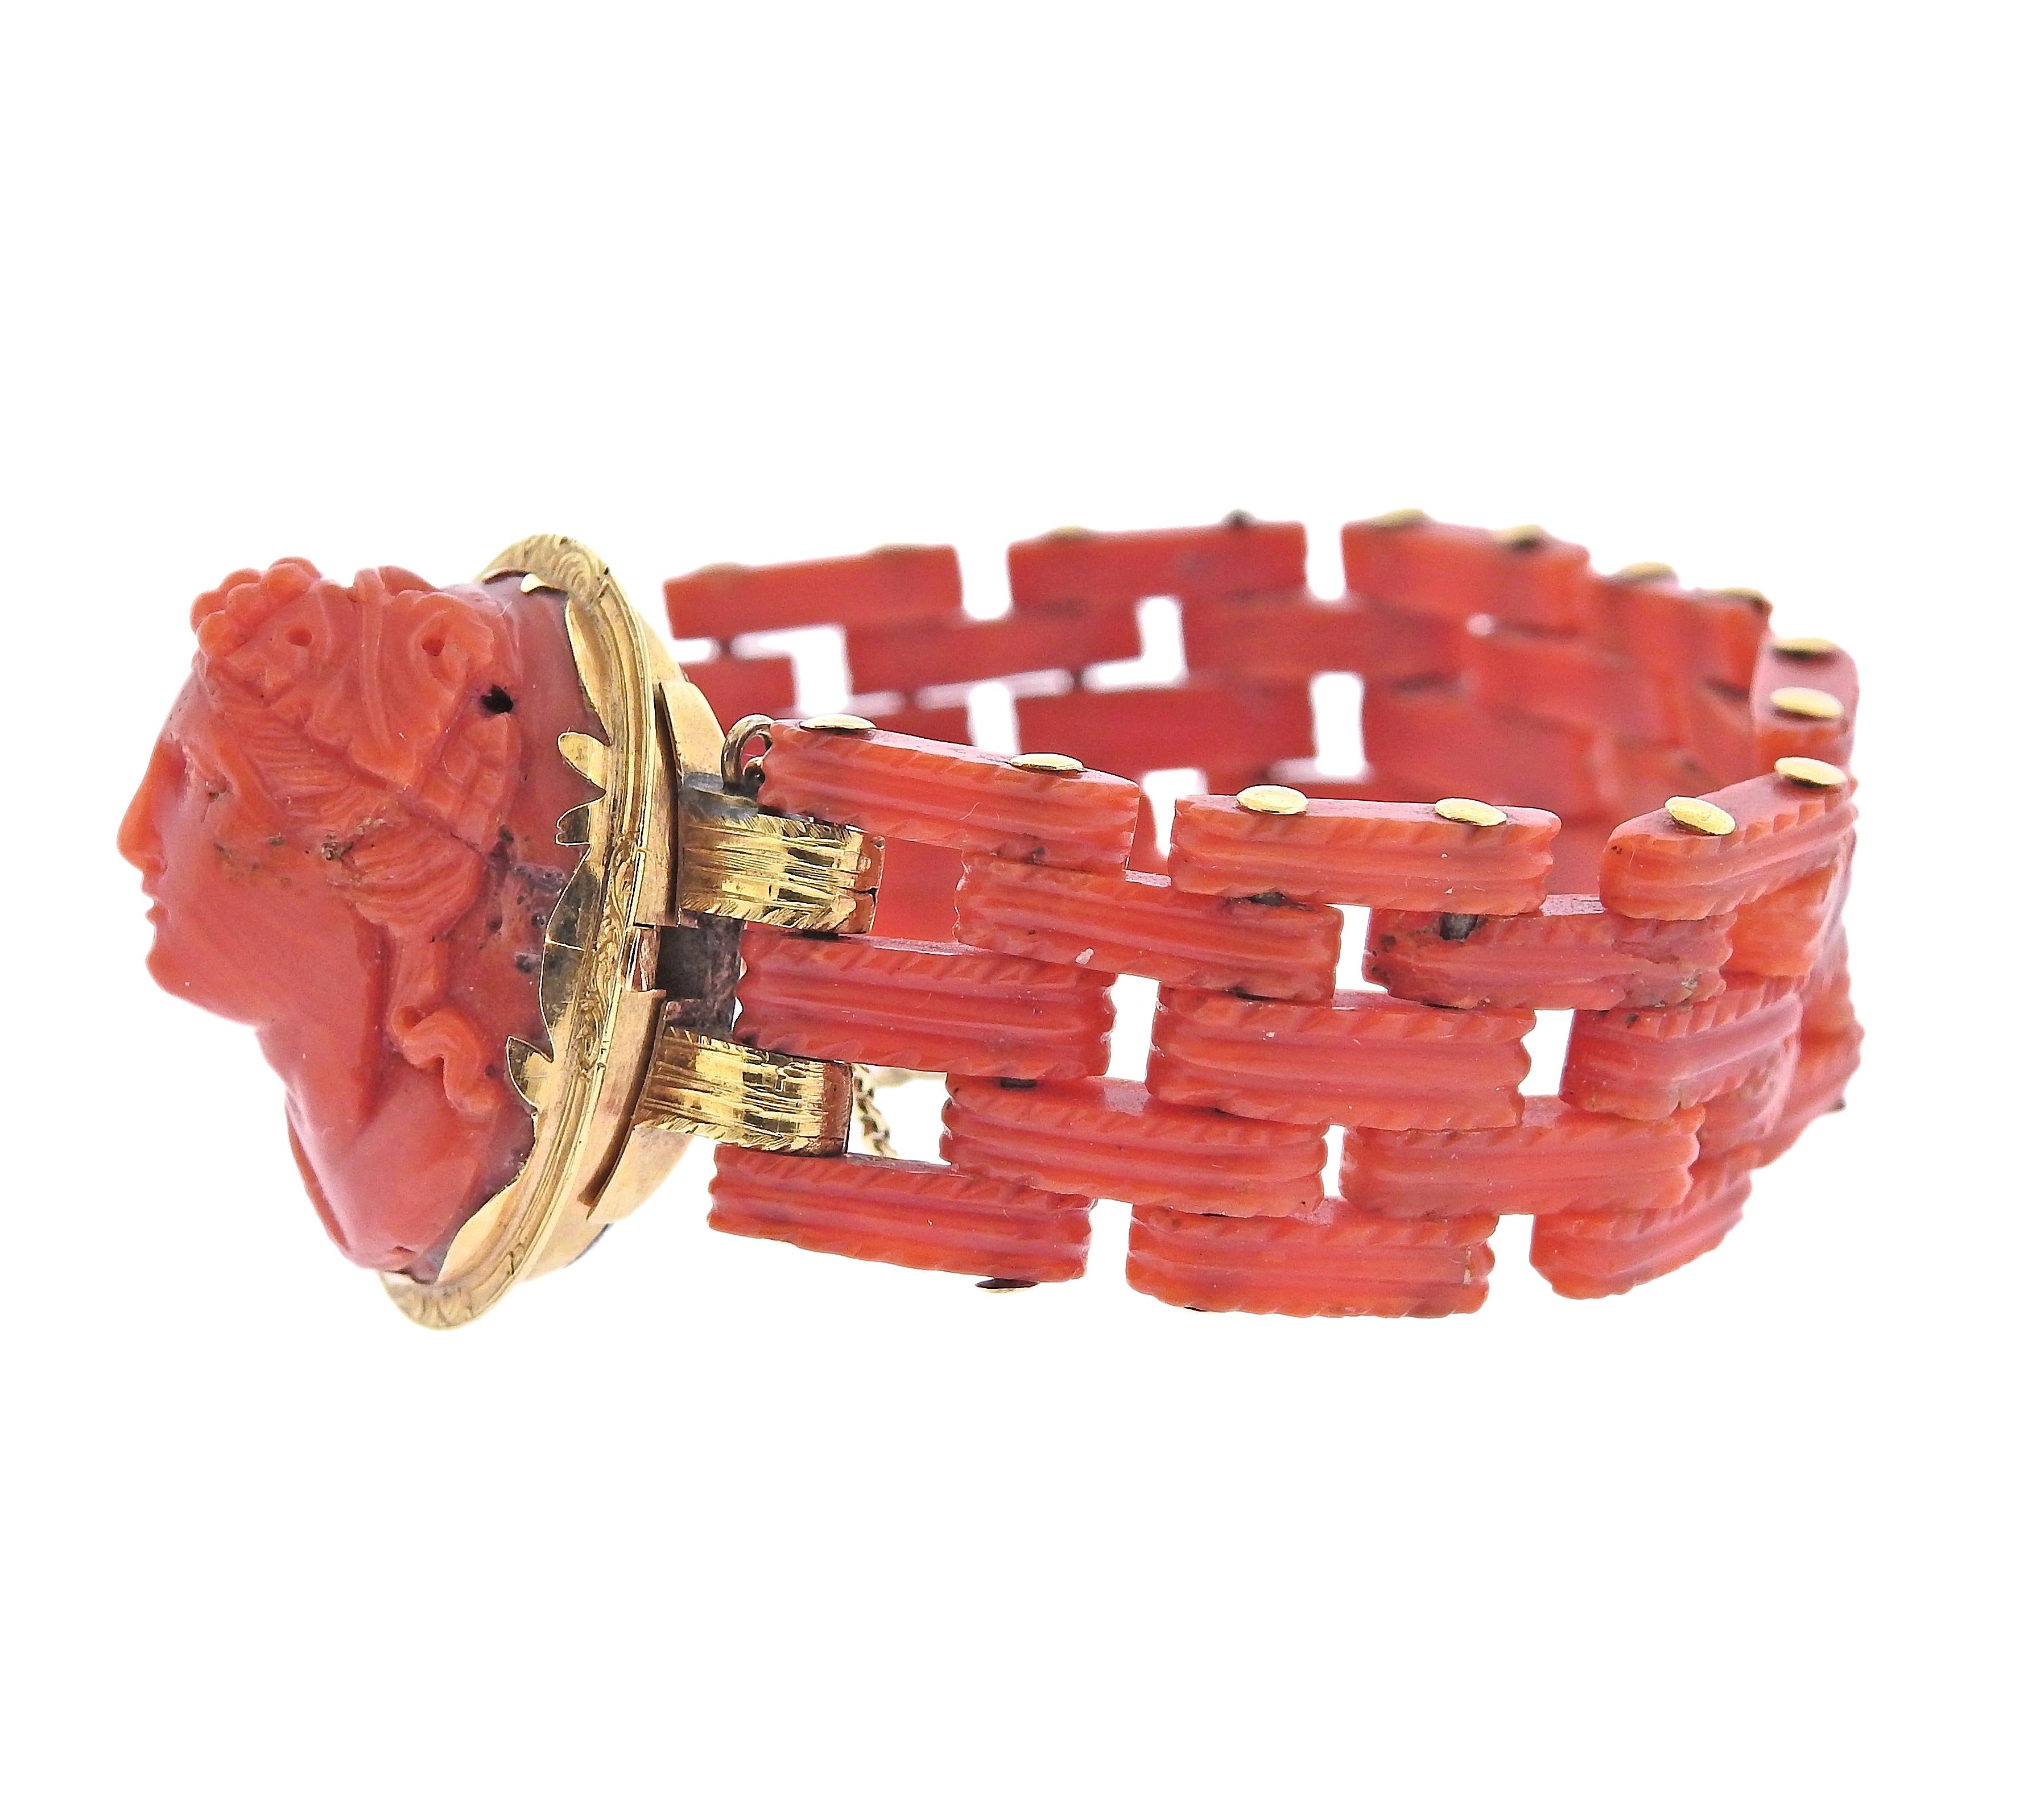 Antique Victorian bracelet, set in 18k gold with coral links and coral cameo in the center. Bracelet is 6.5